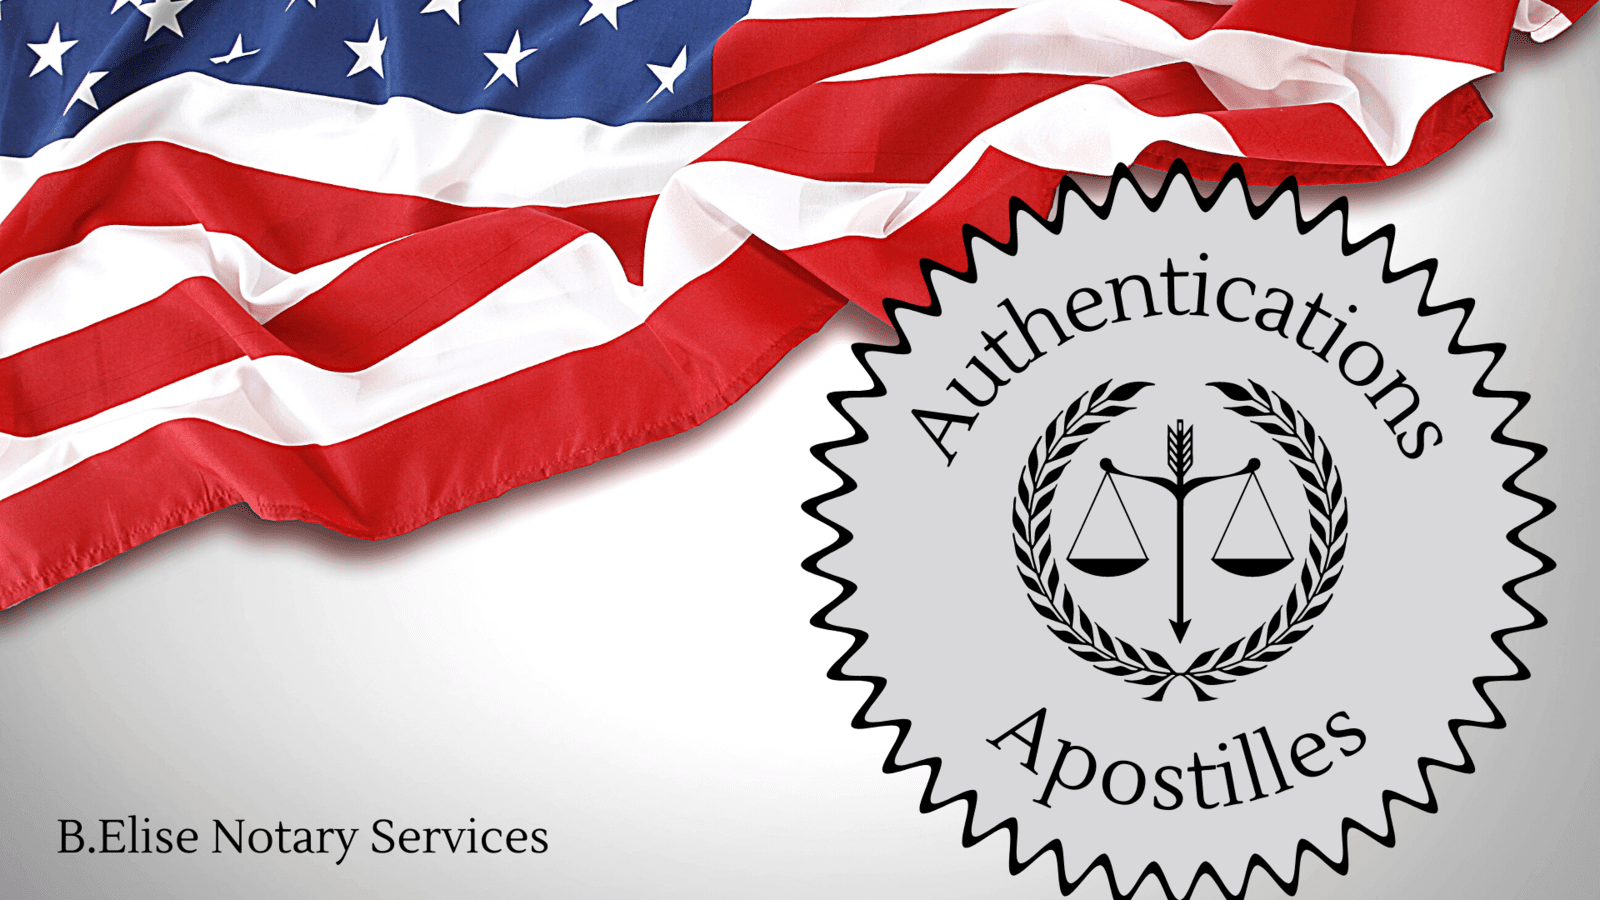 american flag with badge that says authentications apostilles